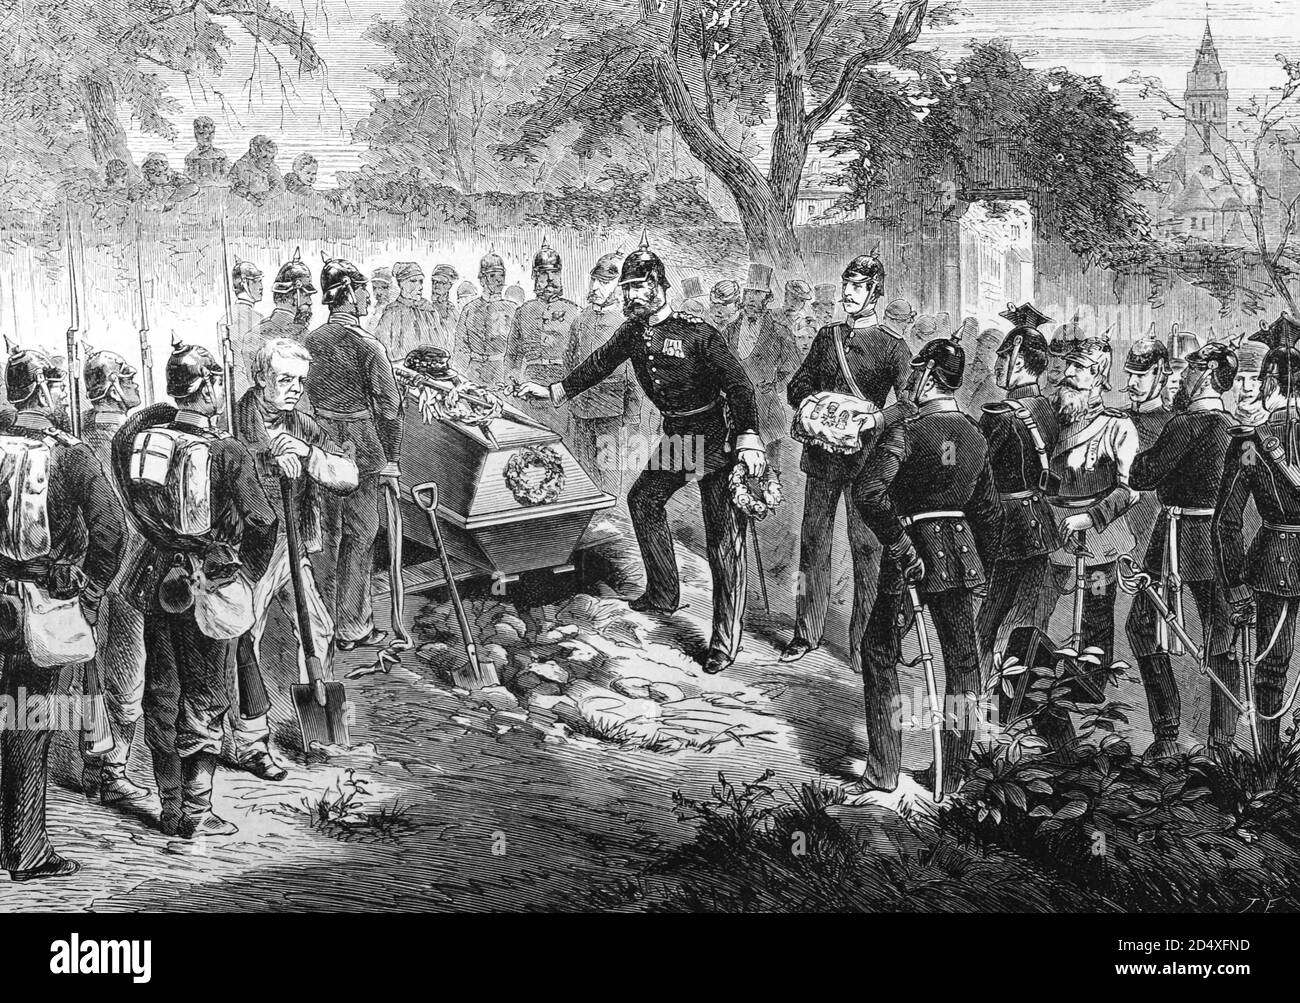 French General Donaine buried by Prussian troops in Saargemuend, Sarreguemines, illustrated war history, German - French war 1870-1871 Stock Photo